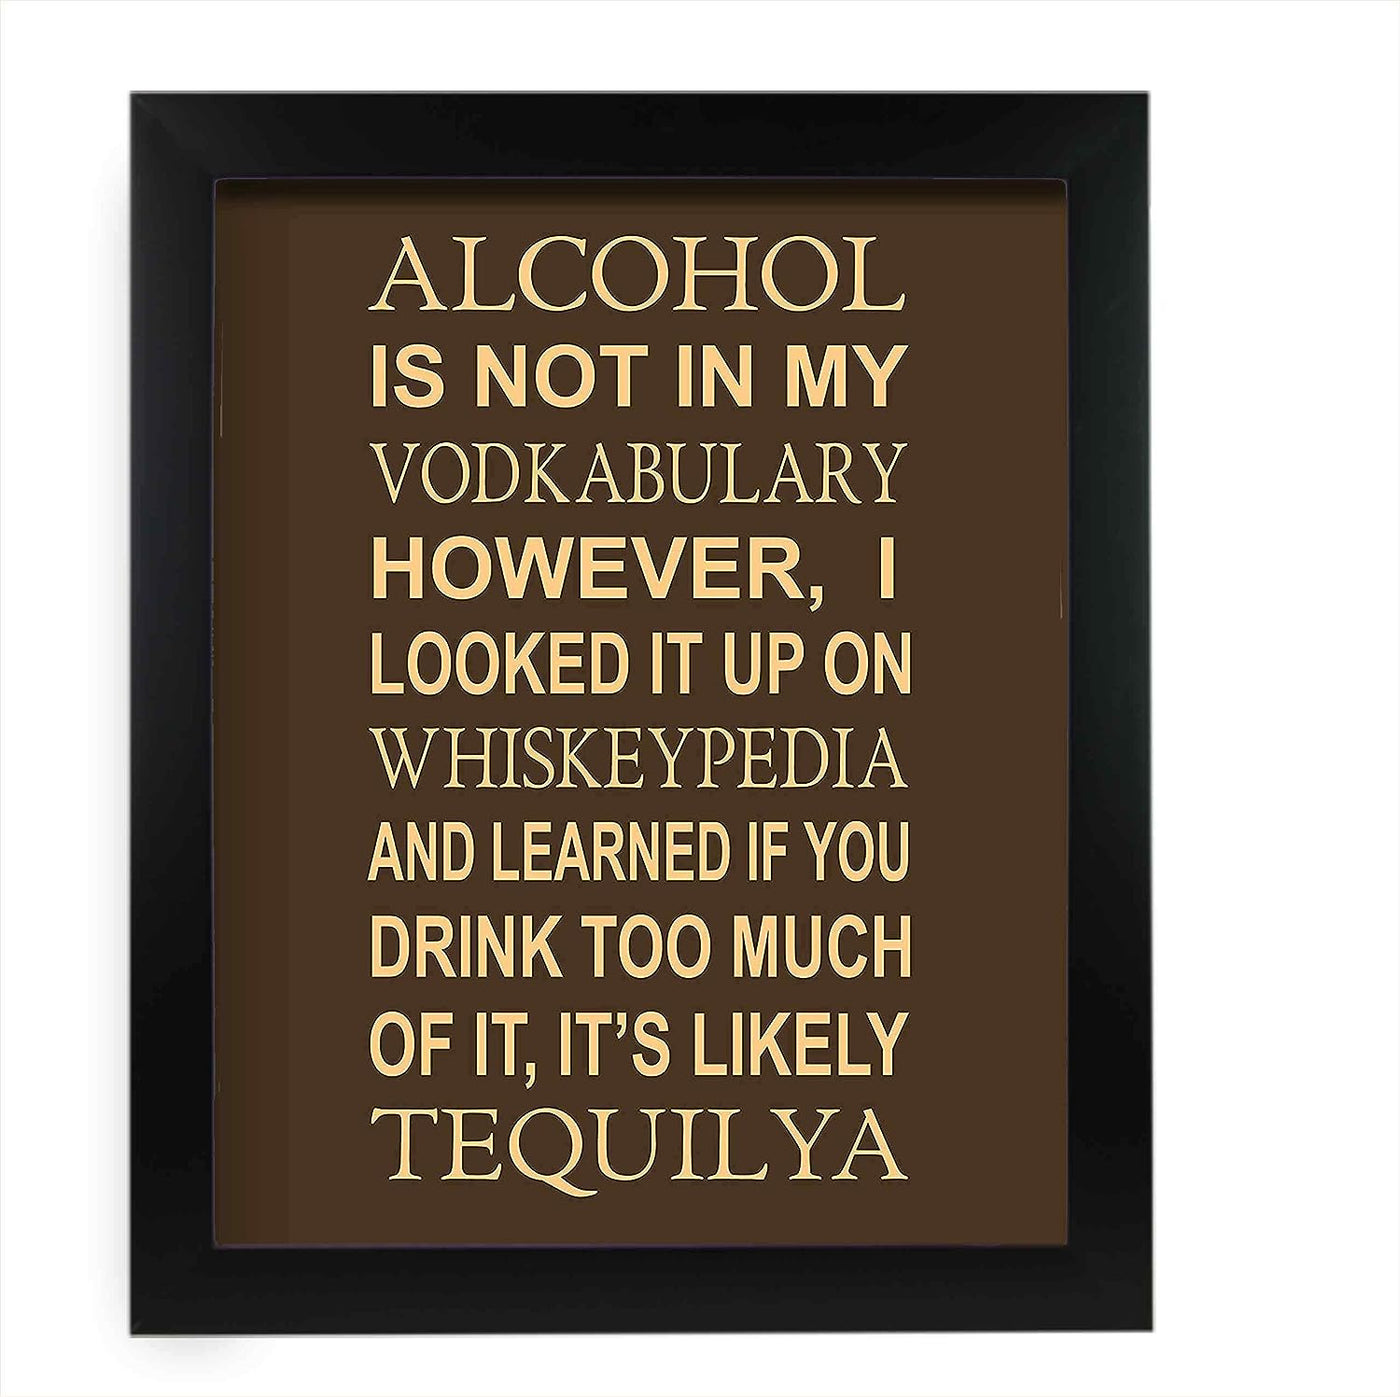 Alcohol Is Not In My Vodkabulary Funny Wall Decor Sign -11 x 14" Rustic Typographic Art Print-Ready to Frame. Humorous Home-Kitchen-Bar-Shop-Cave Decor. Fun Gift for Alcohol-Beer-Wine Drinkers!